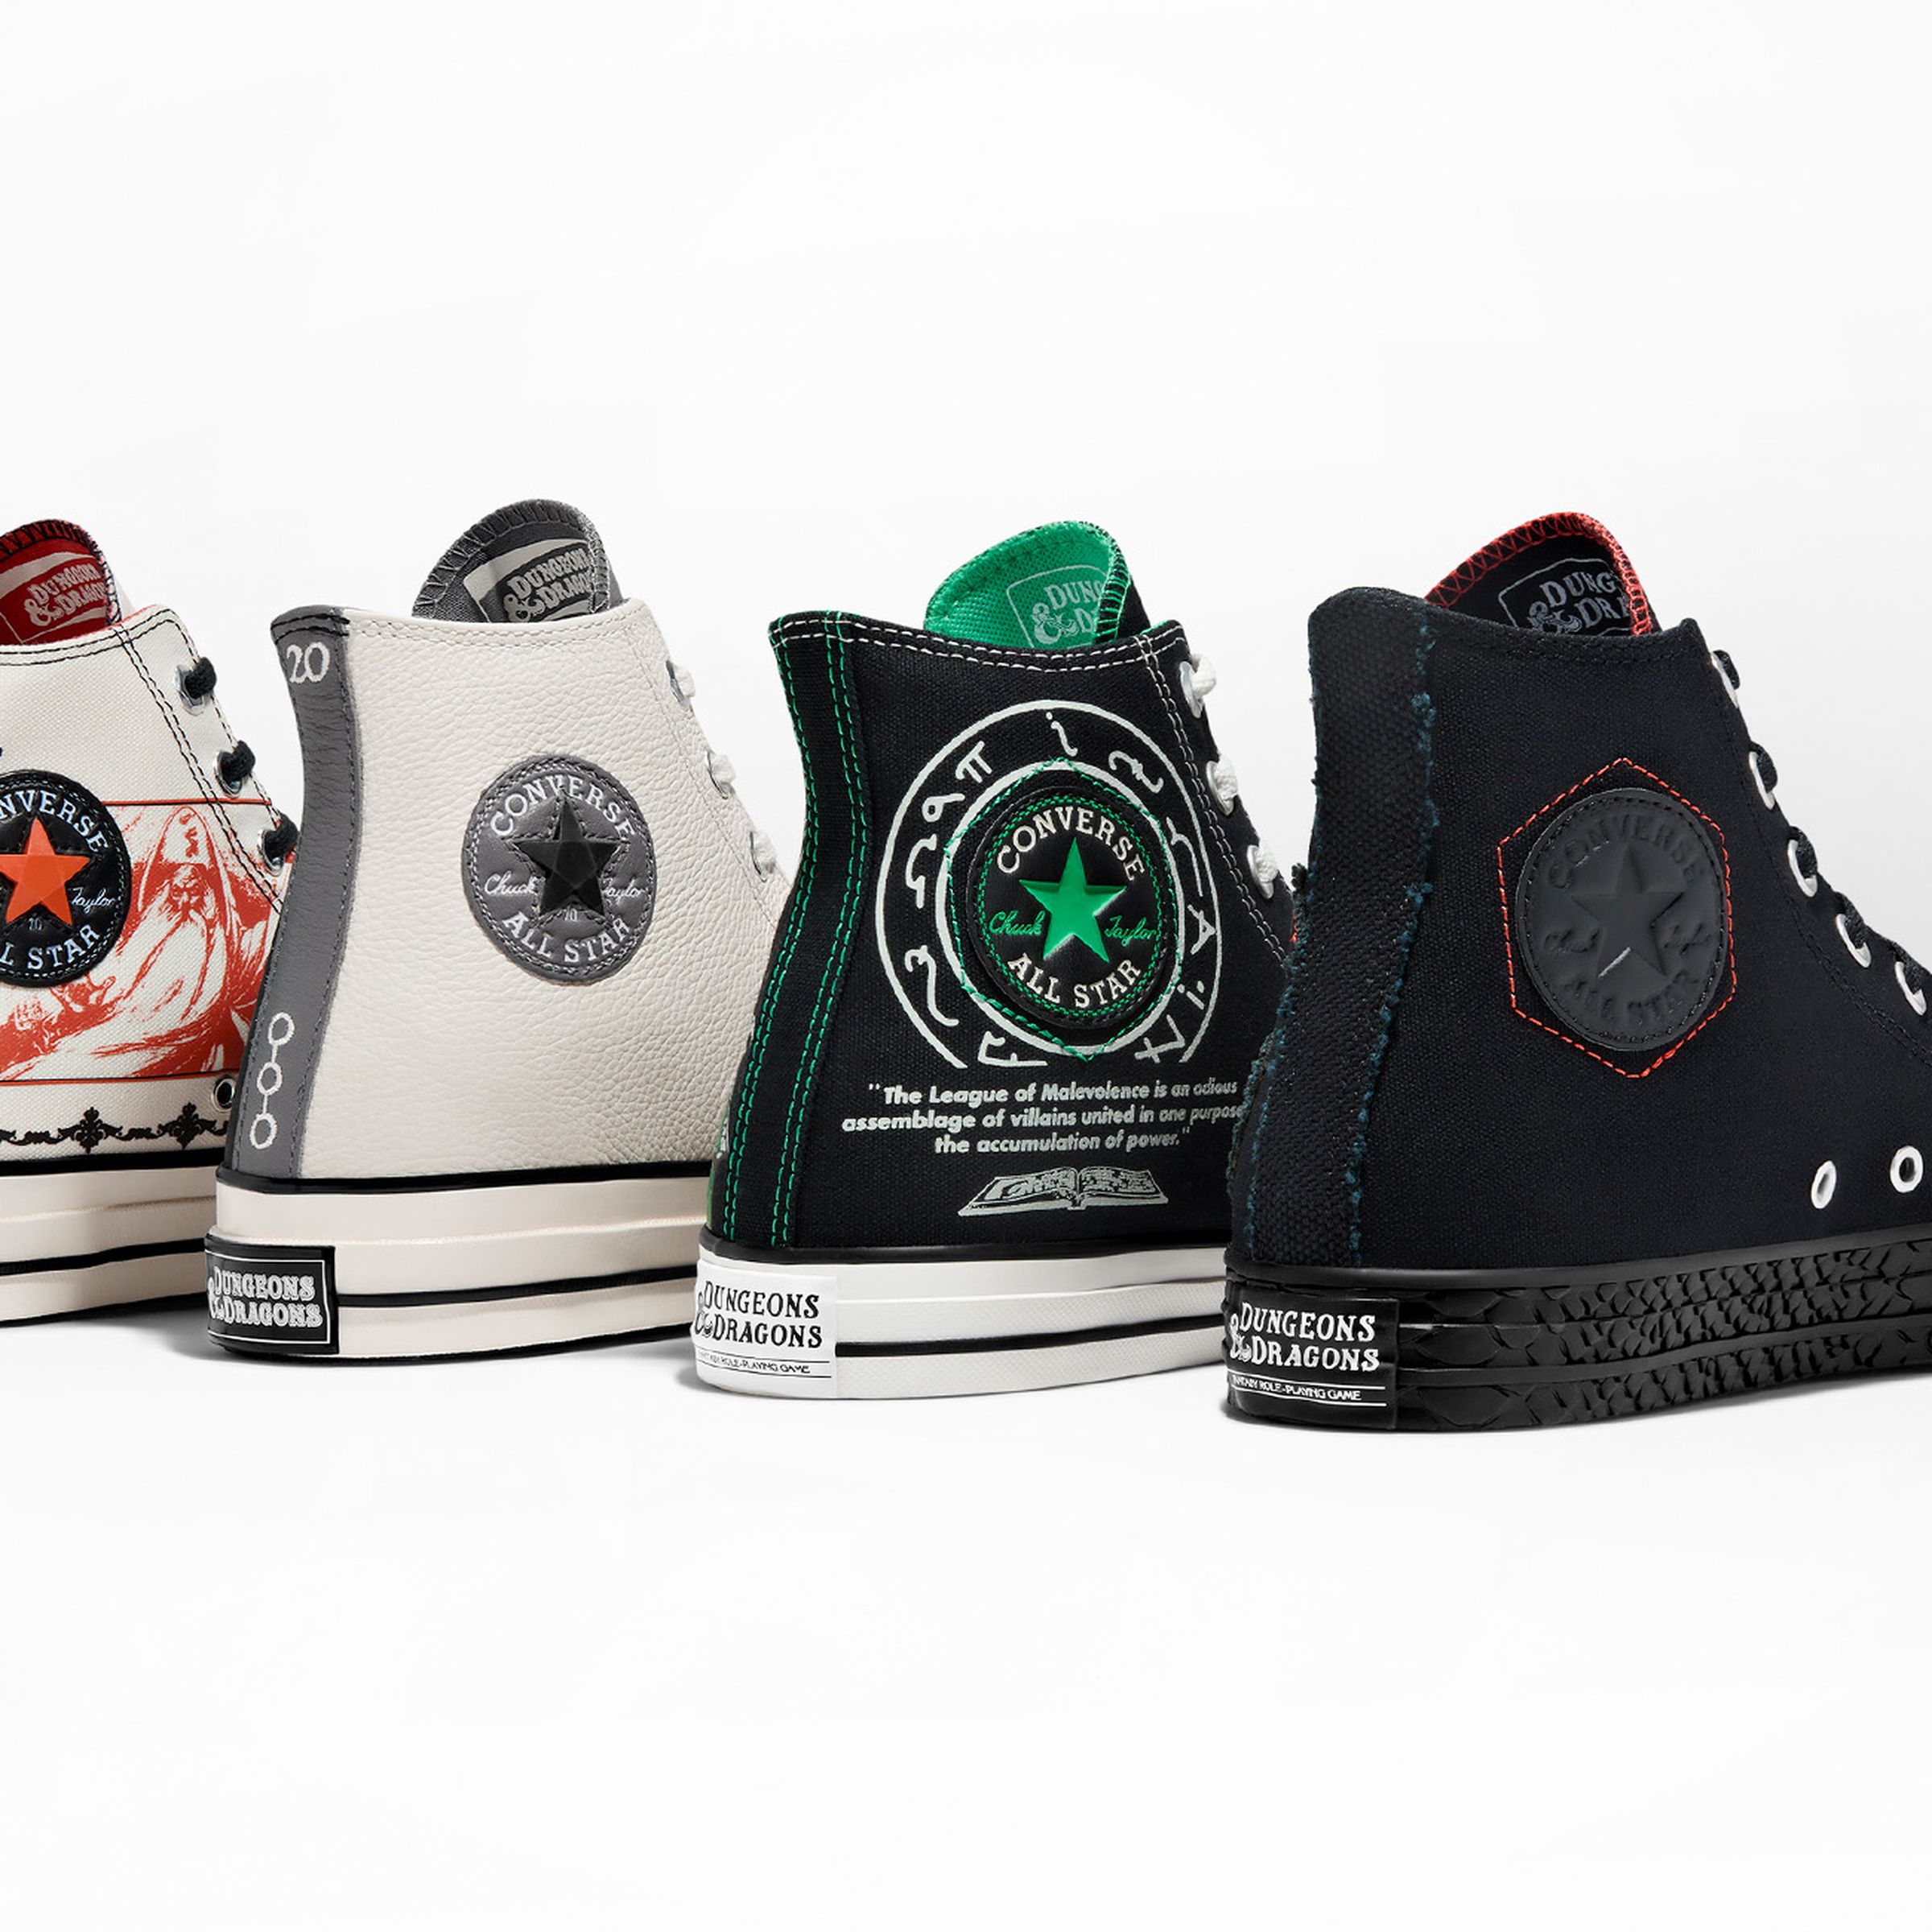 The lineup of D&amp;D-themed Converse sneakers.